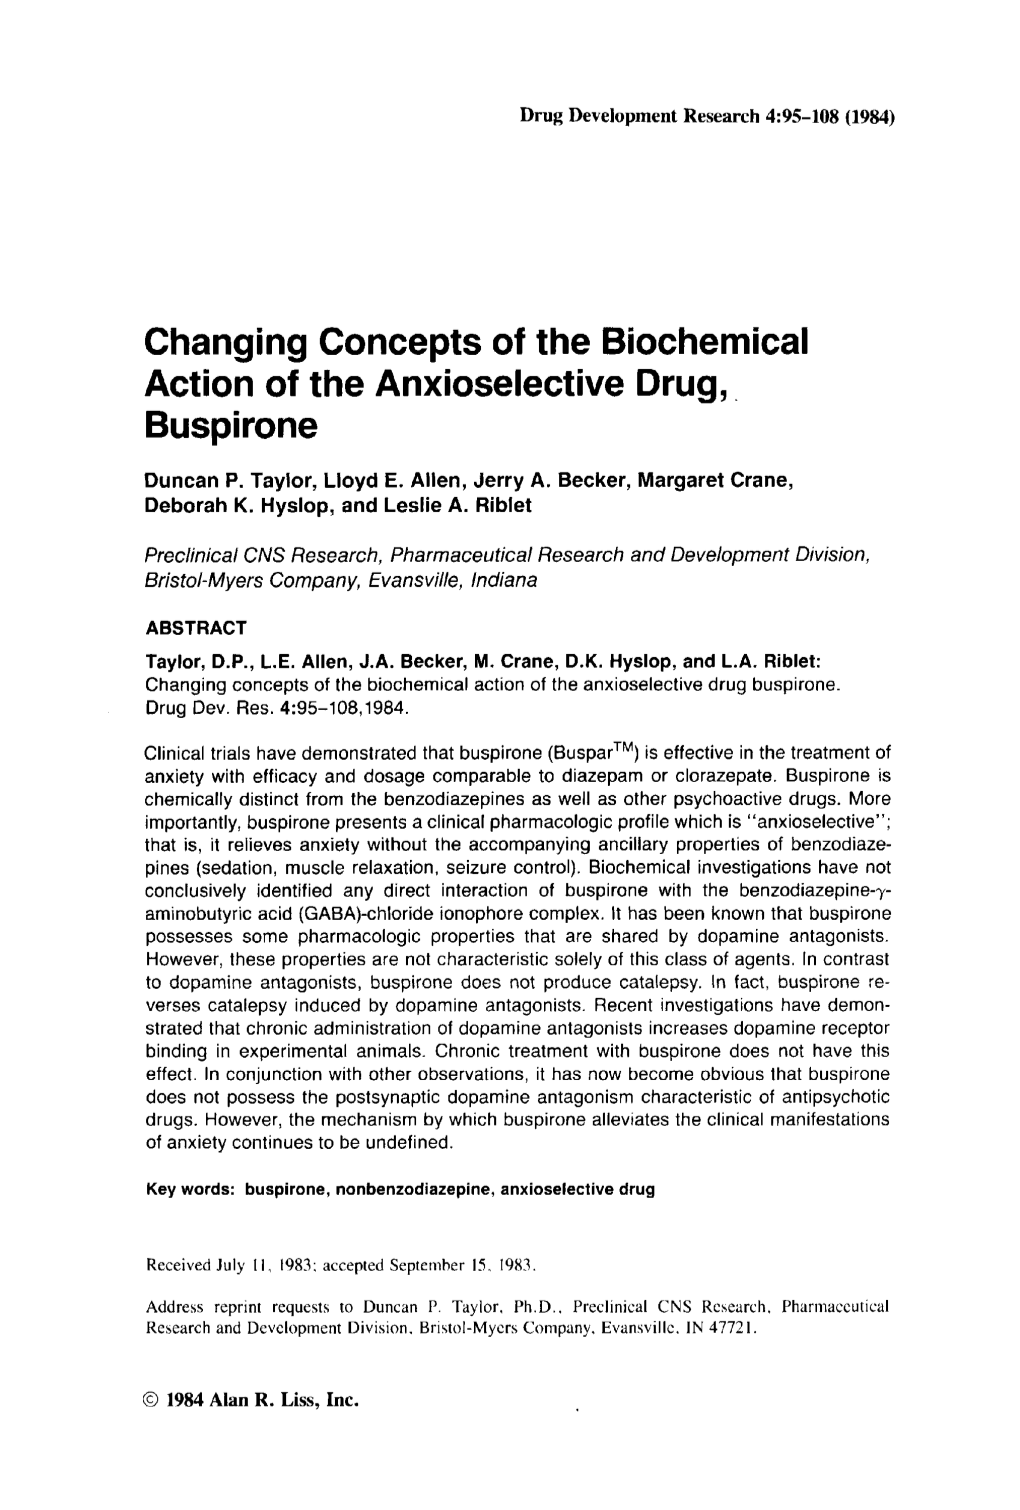 Changing Concepts of the Biochemical Action of the Anxioselective Drug, Buspirone